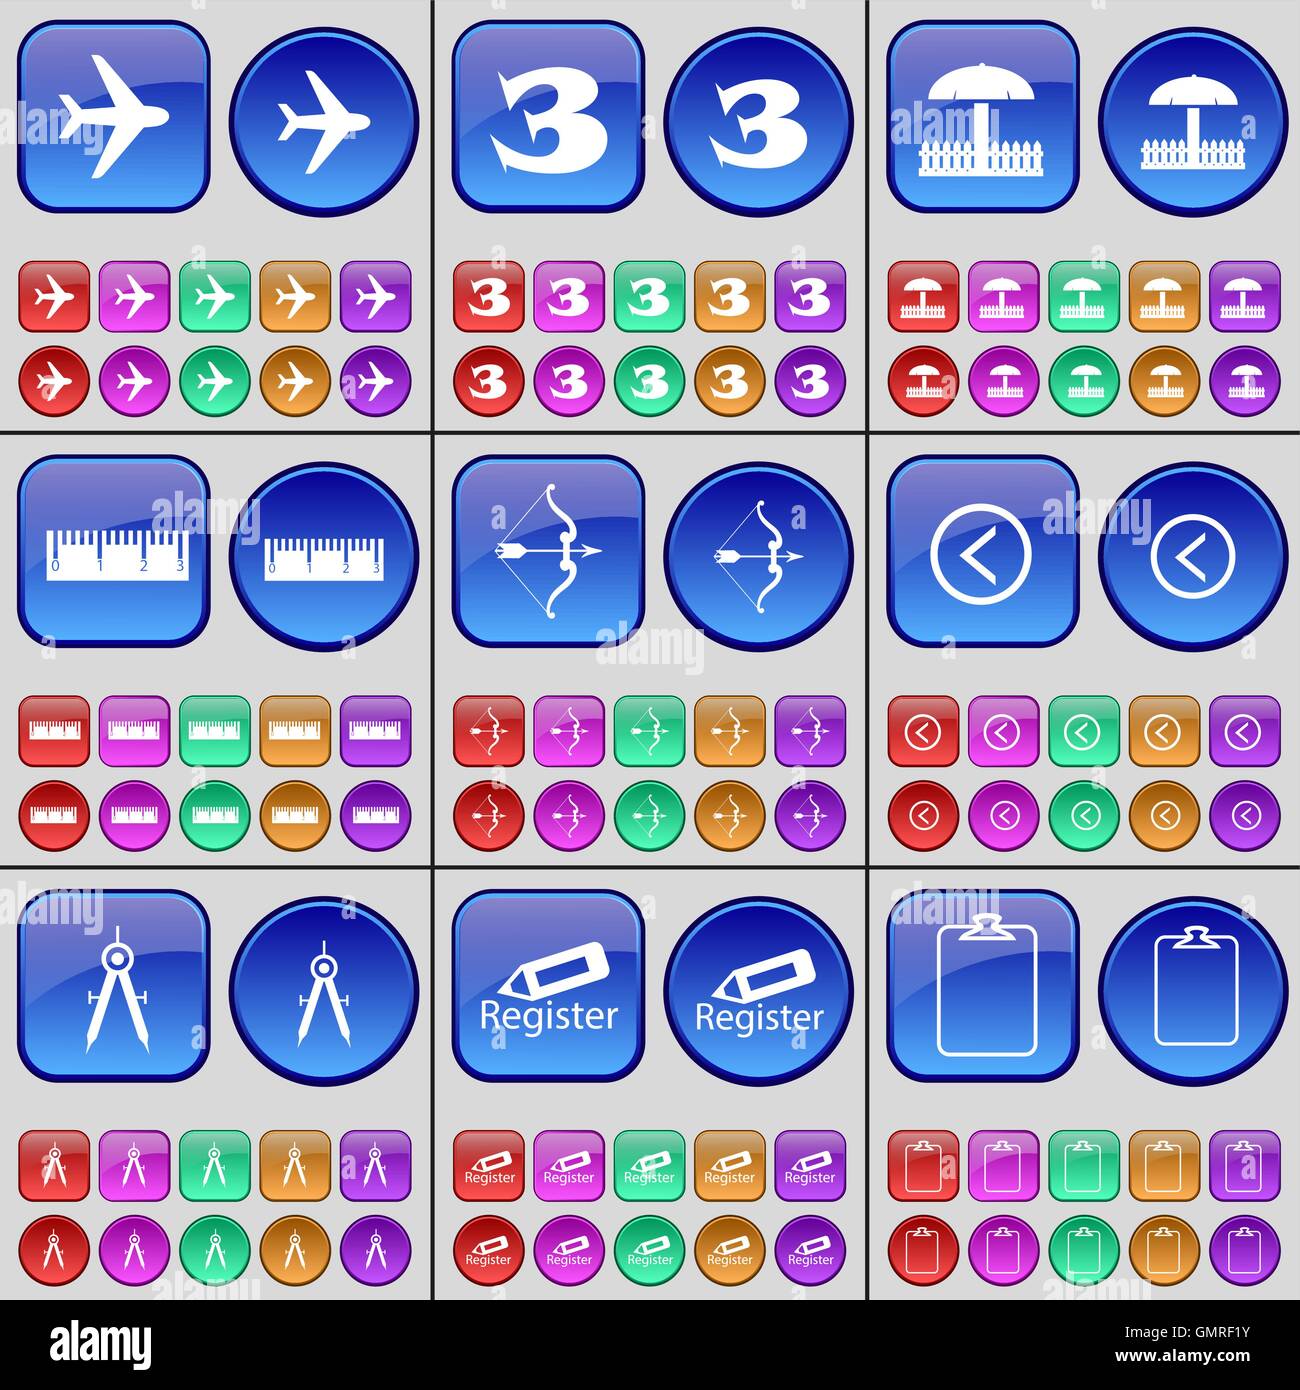 Airplane, Three, Umbrella, Ruler, Bow, Arrow left, Compasses, Register, Survey. A large set of multi-colored buttons. Vector Stock Vector